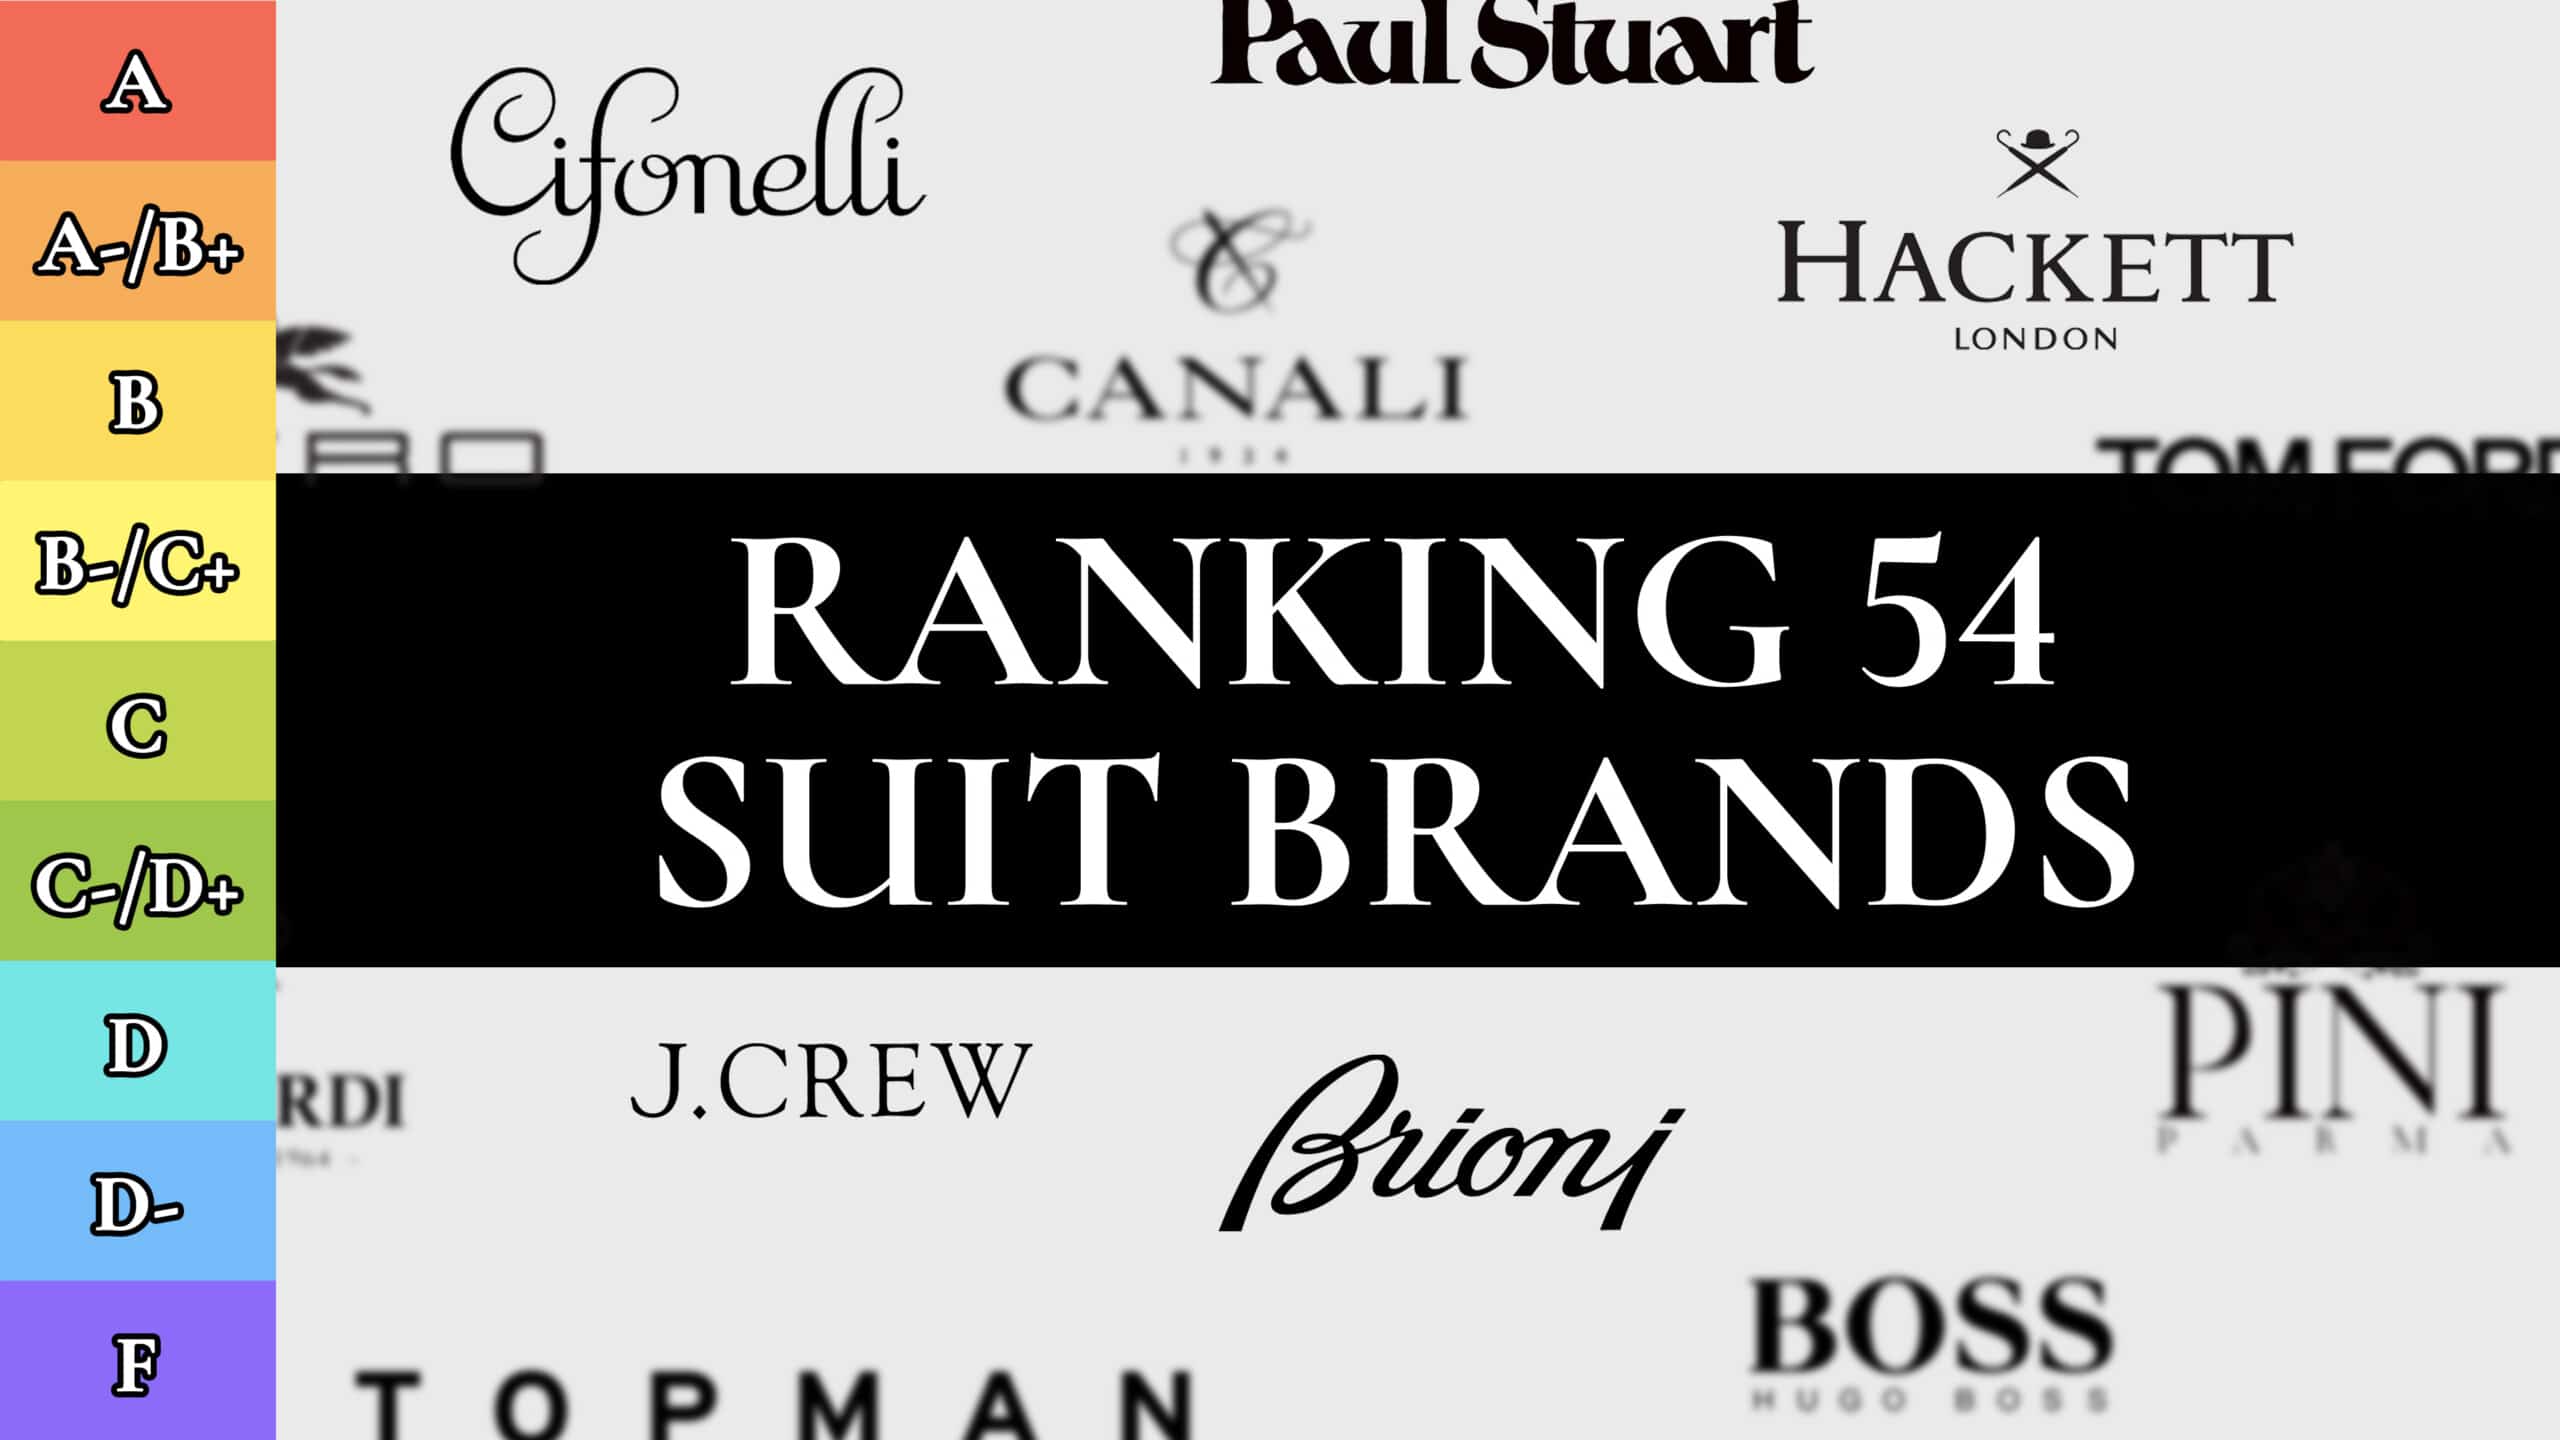 Top 10 Track Pant Brands In India For 2023  CashKaro